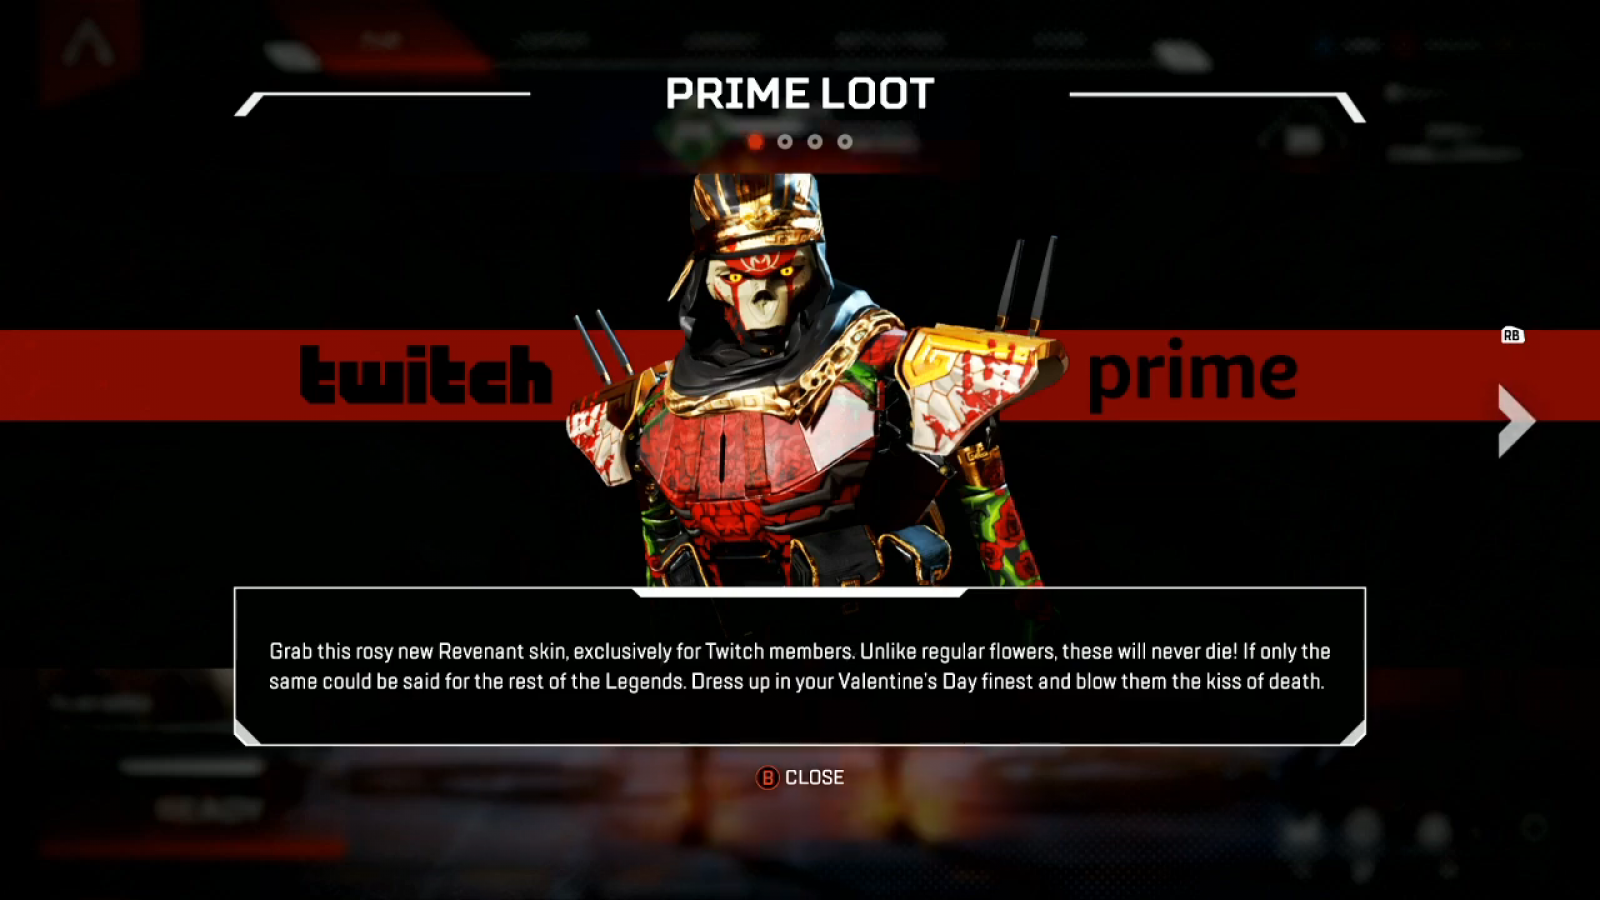 Apex Legends Twitch Prime Loot Guide Claim Loot Link To Ea To Get Revenant Skin